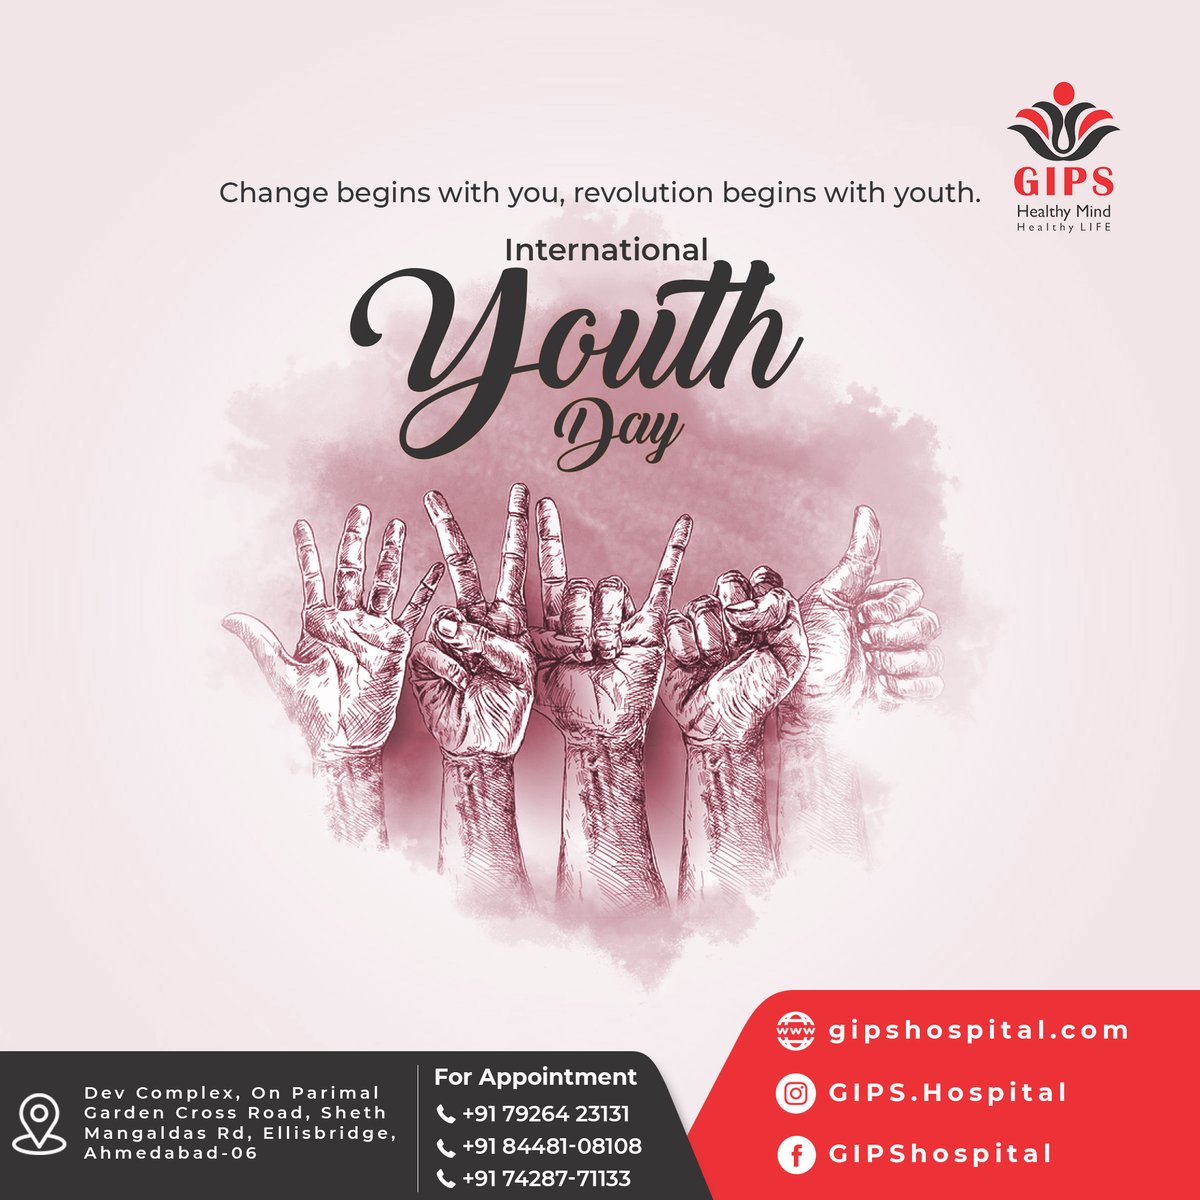 International Youth Day!
Change begins with you, and revolution begins with youth.
#InternationalYouthDay #InternationalYouthDay2023 #YouthDay2023 #Youth #GreenSkillsForYouth #EmpowerYoungPeople #YouthLeadership #YouthEmpowerment #gips #psychiatry #psychiatristclinic